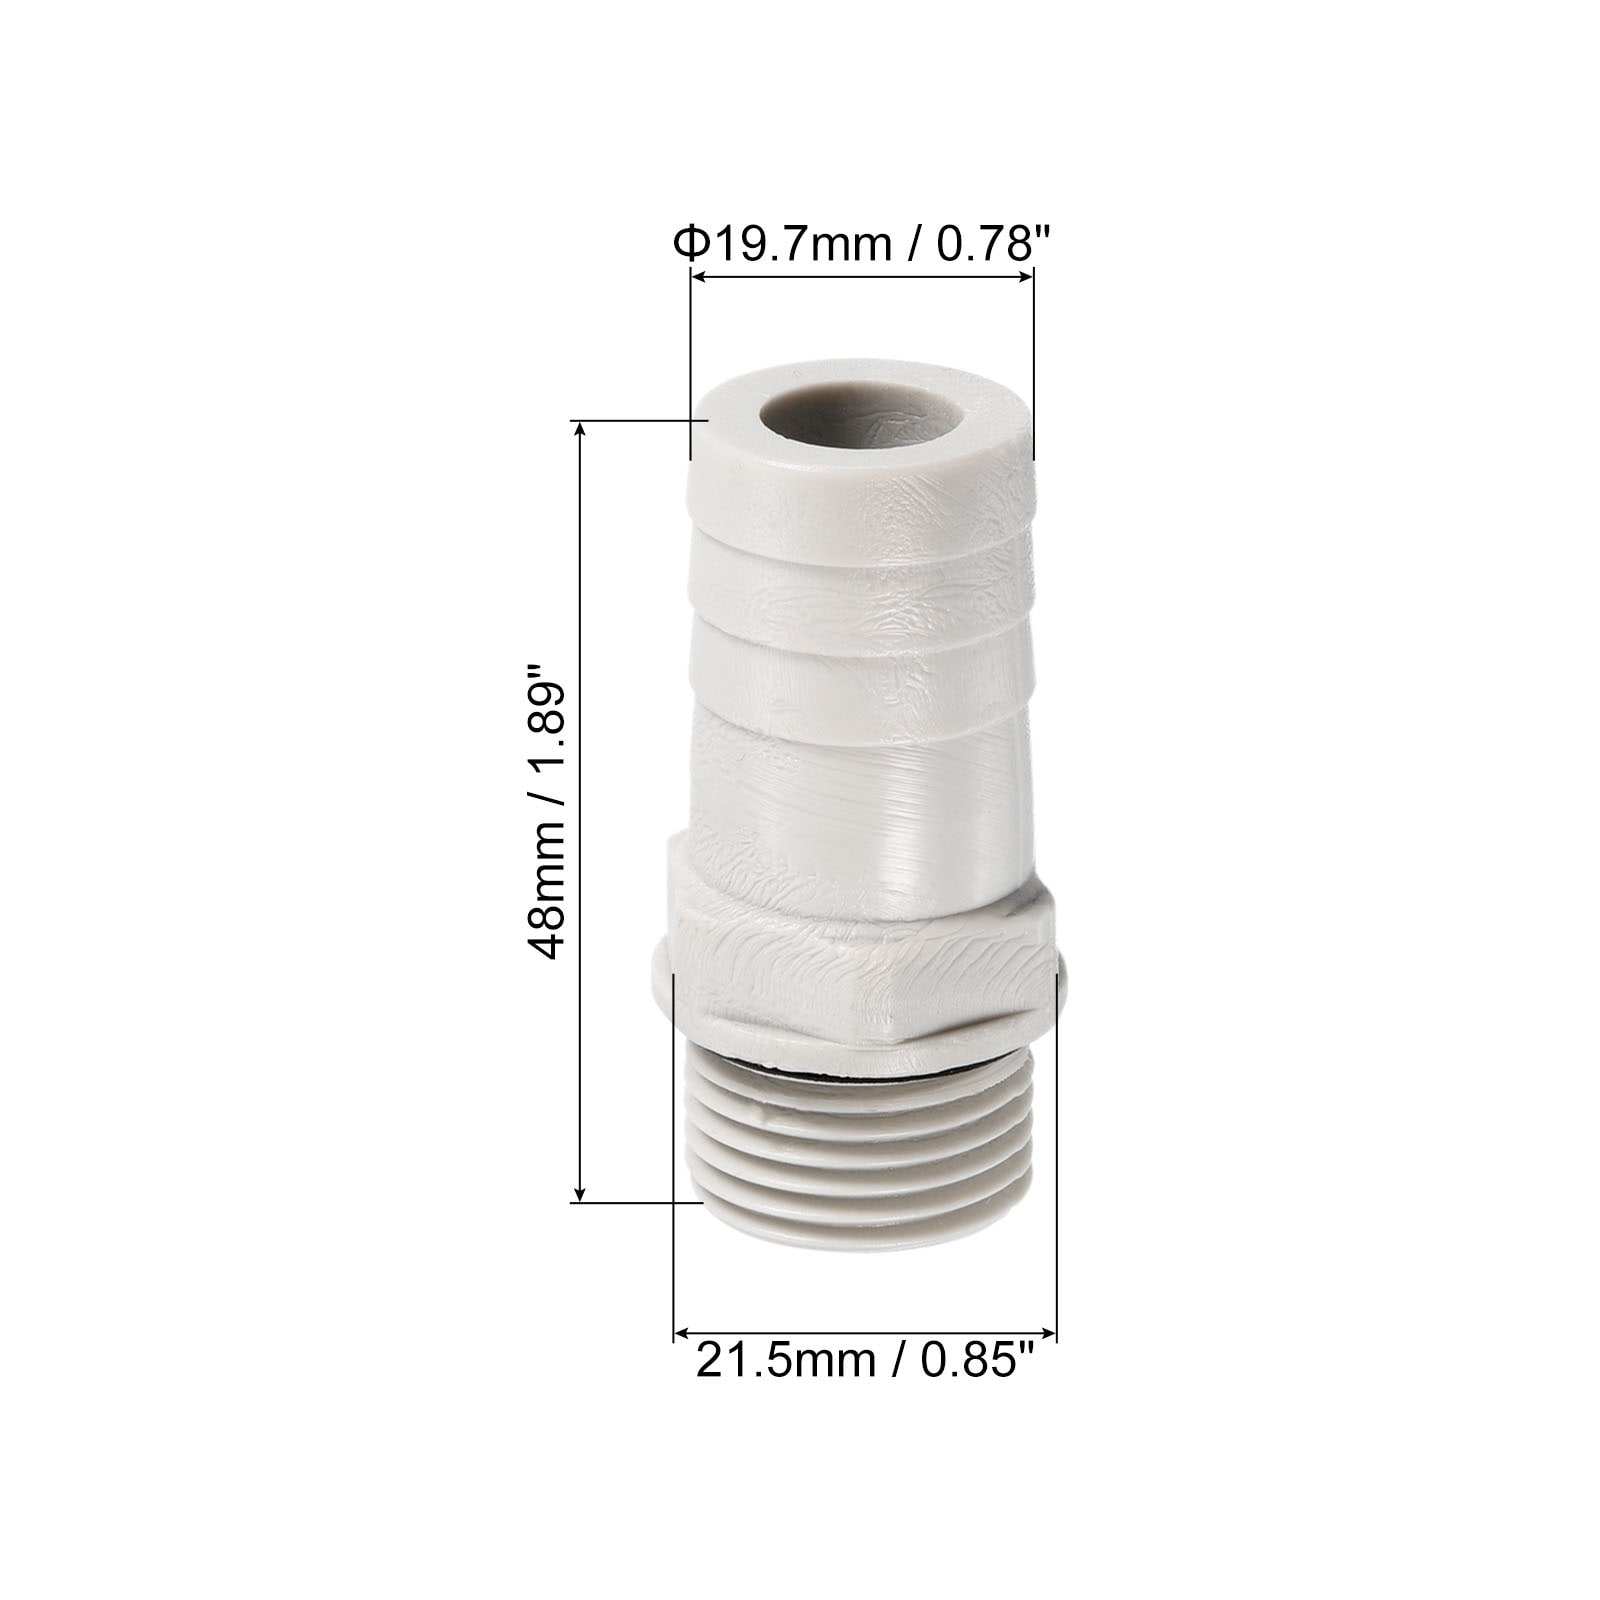 UPVC Barb Hose Fitting 20mm Barbed G3/4 Male Thread Pipe Connector Adapter